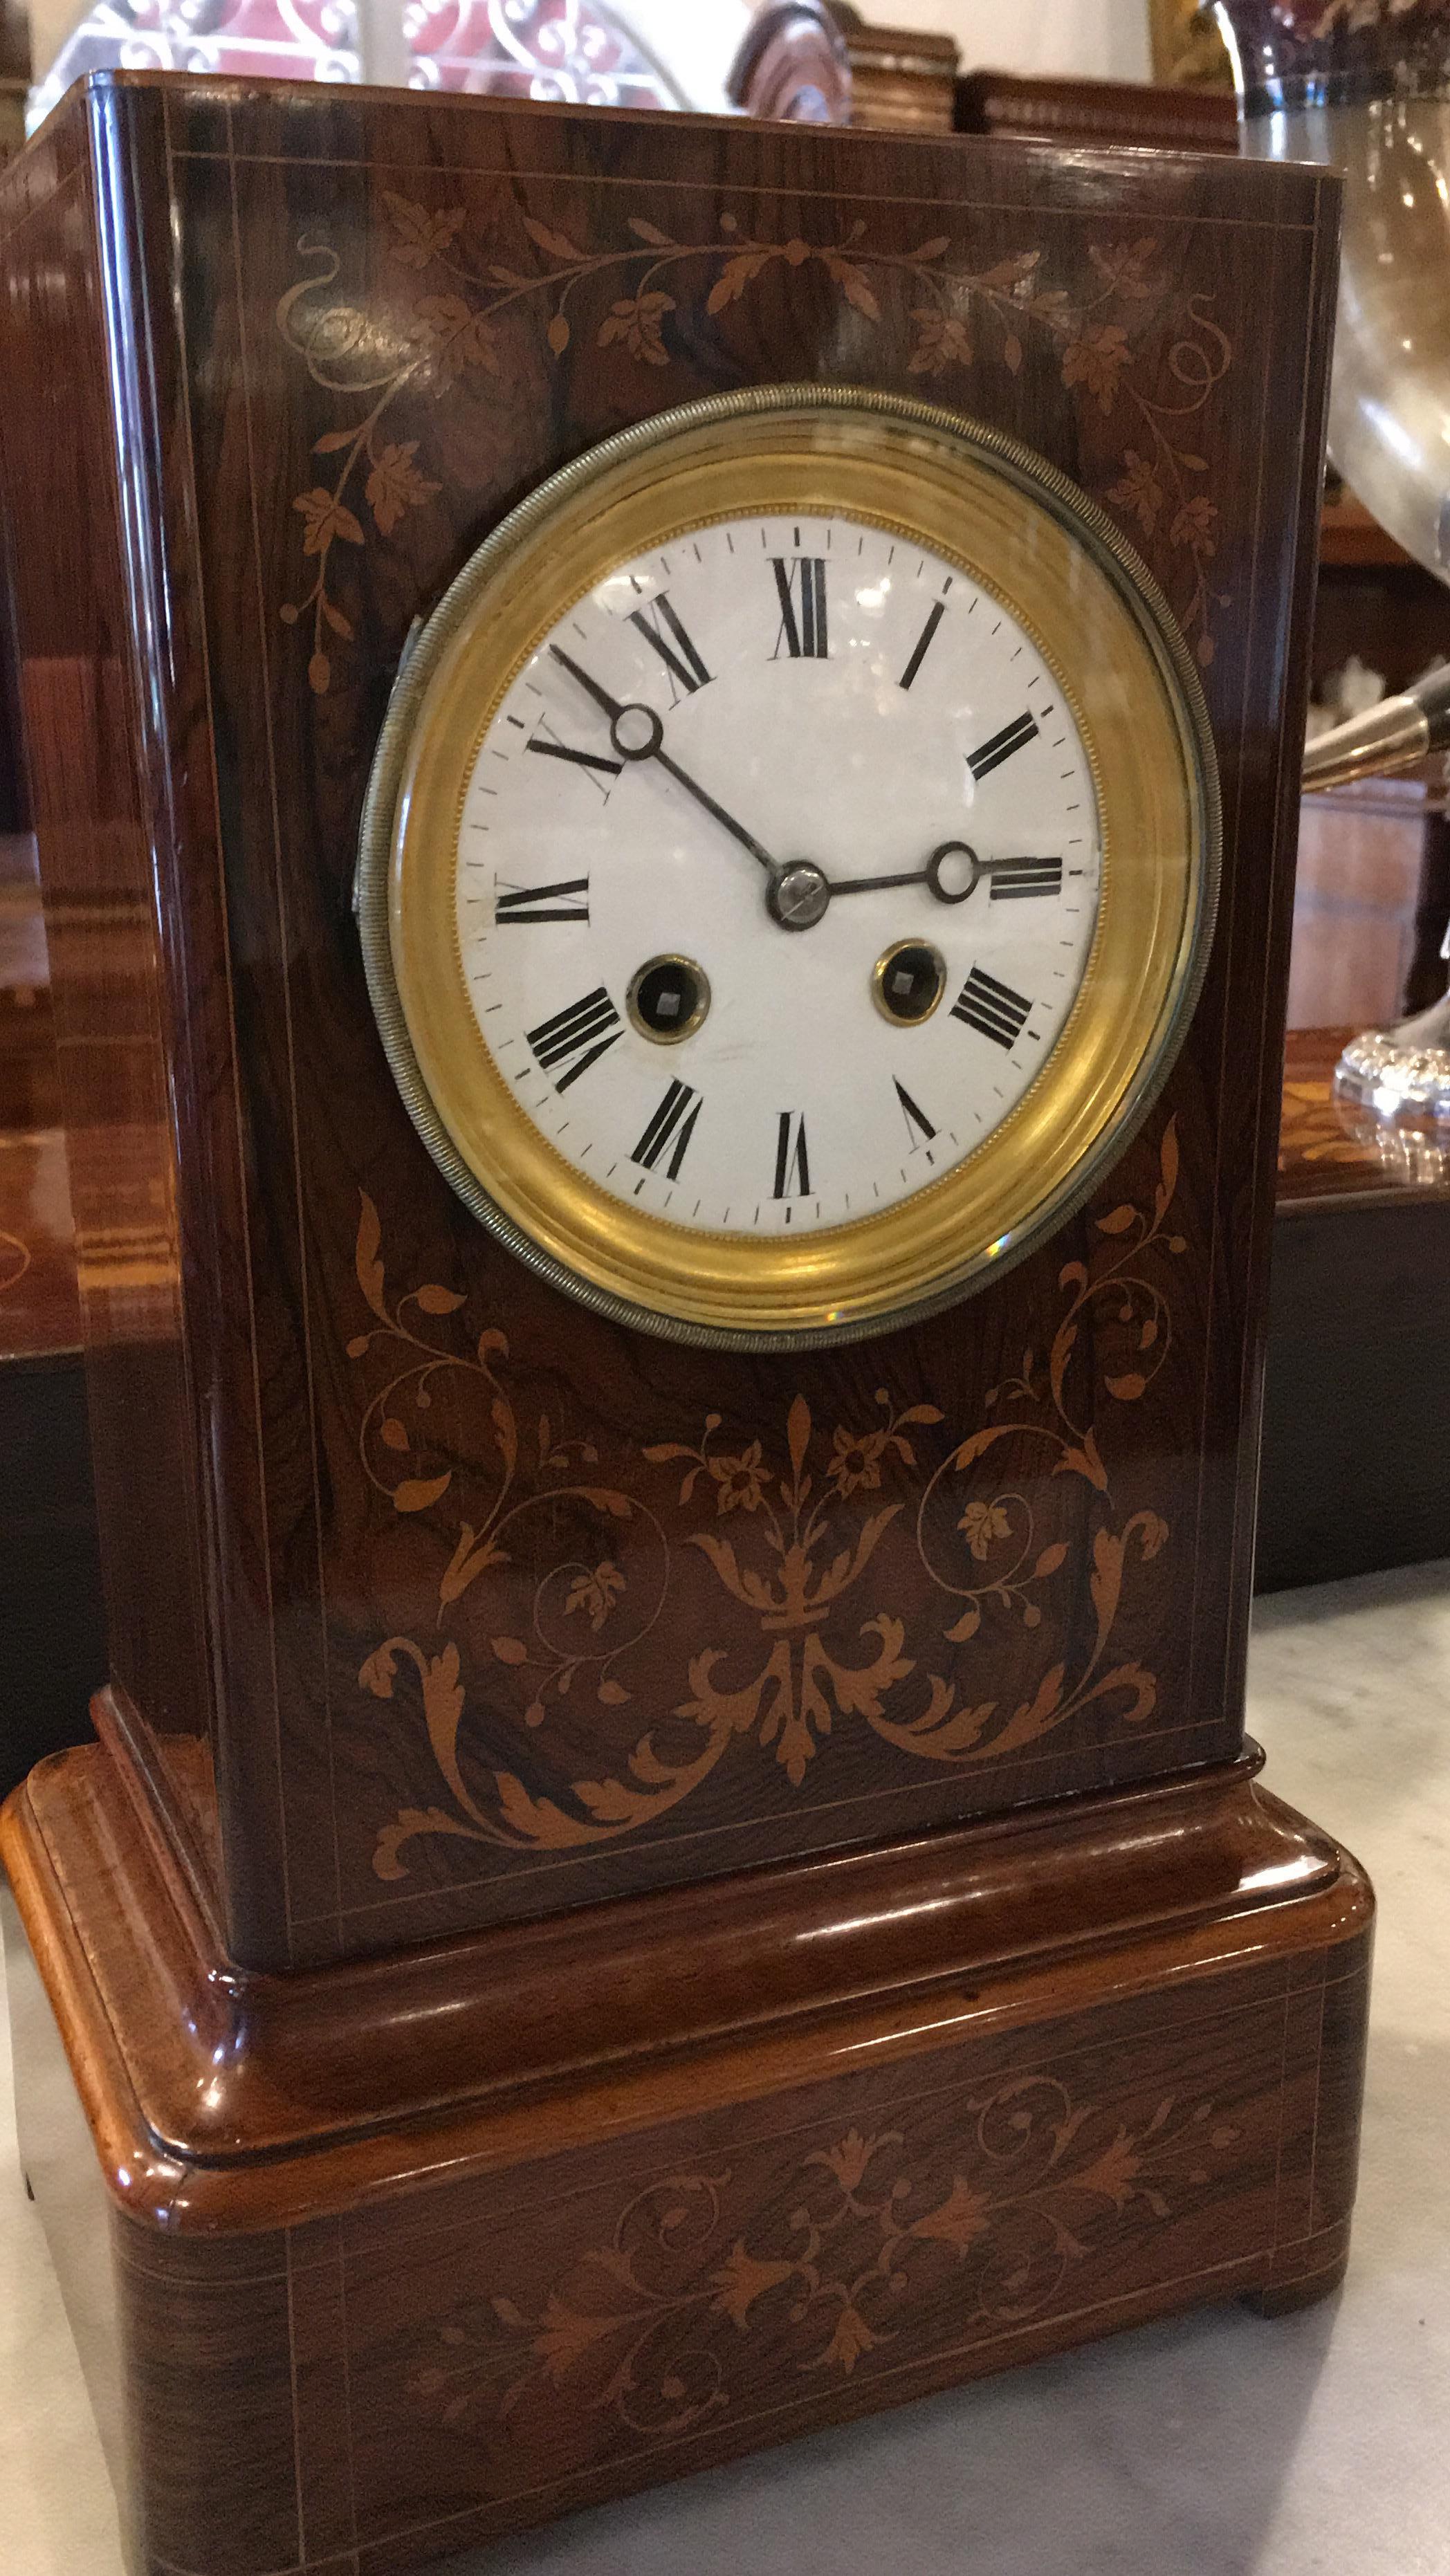 Rosewood Charles X clock with two incense burners also in rosewood and inlaid in boxwood. Restored and functioning. Mechanism signed Japy Freres.
Japy Freres was founded 1n 1806 by Frédéric with his sons Pierre (finances/commerce), Fritz and Louis (